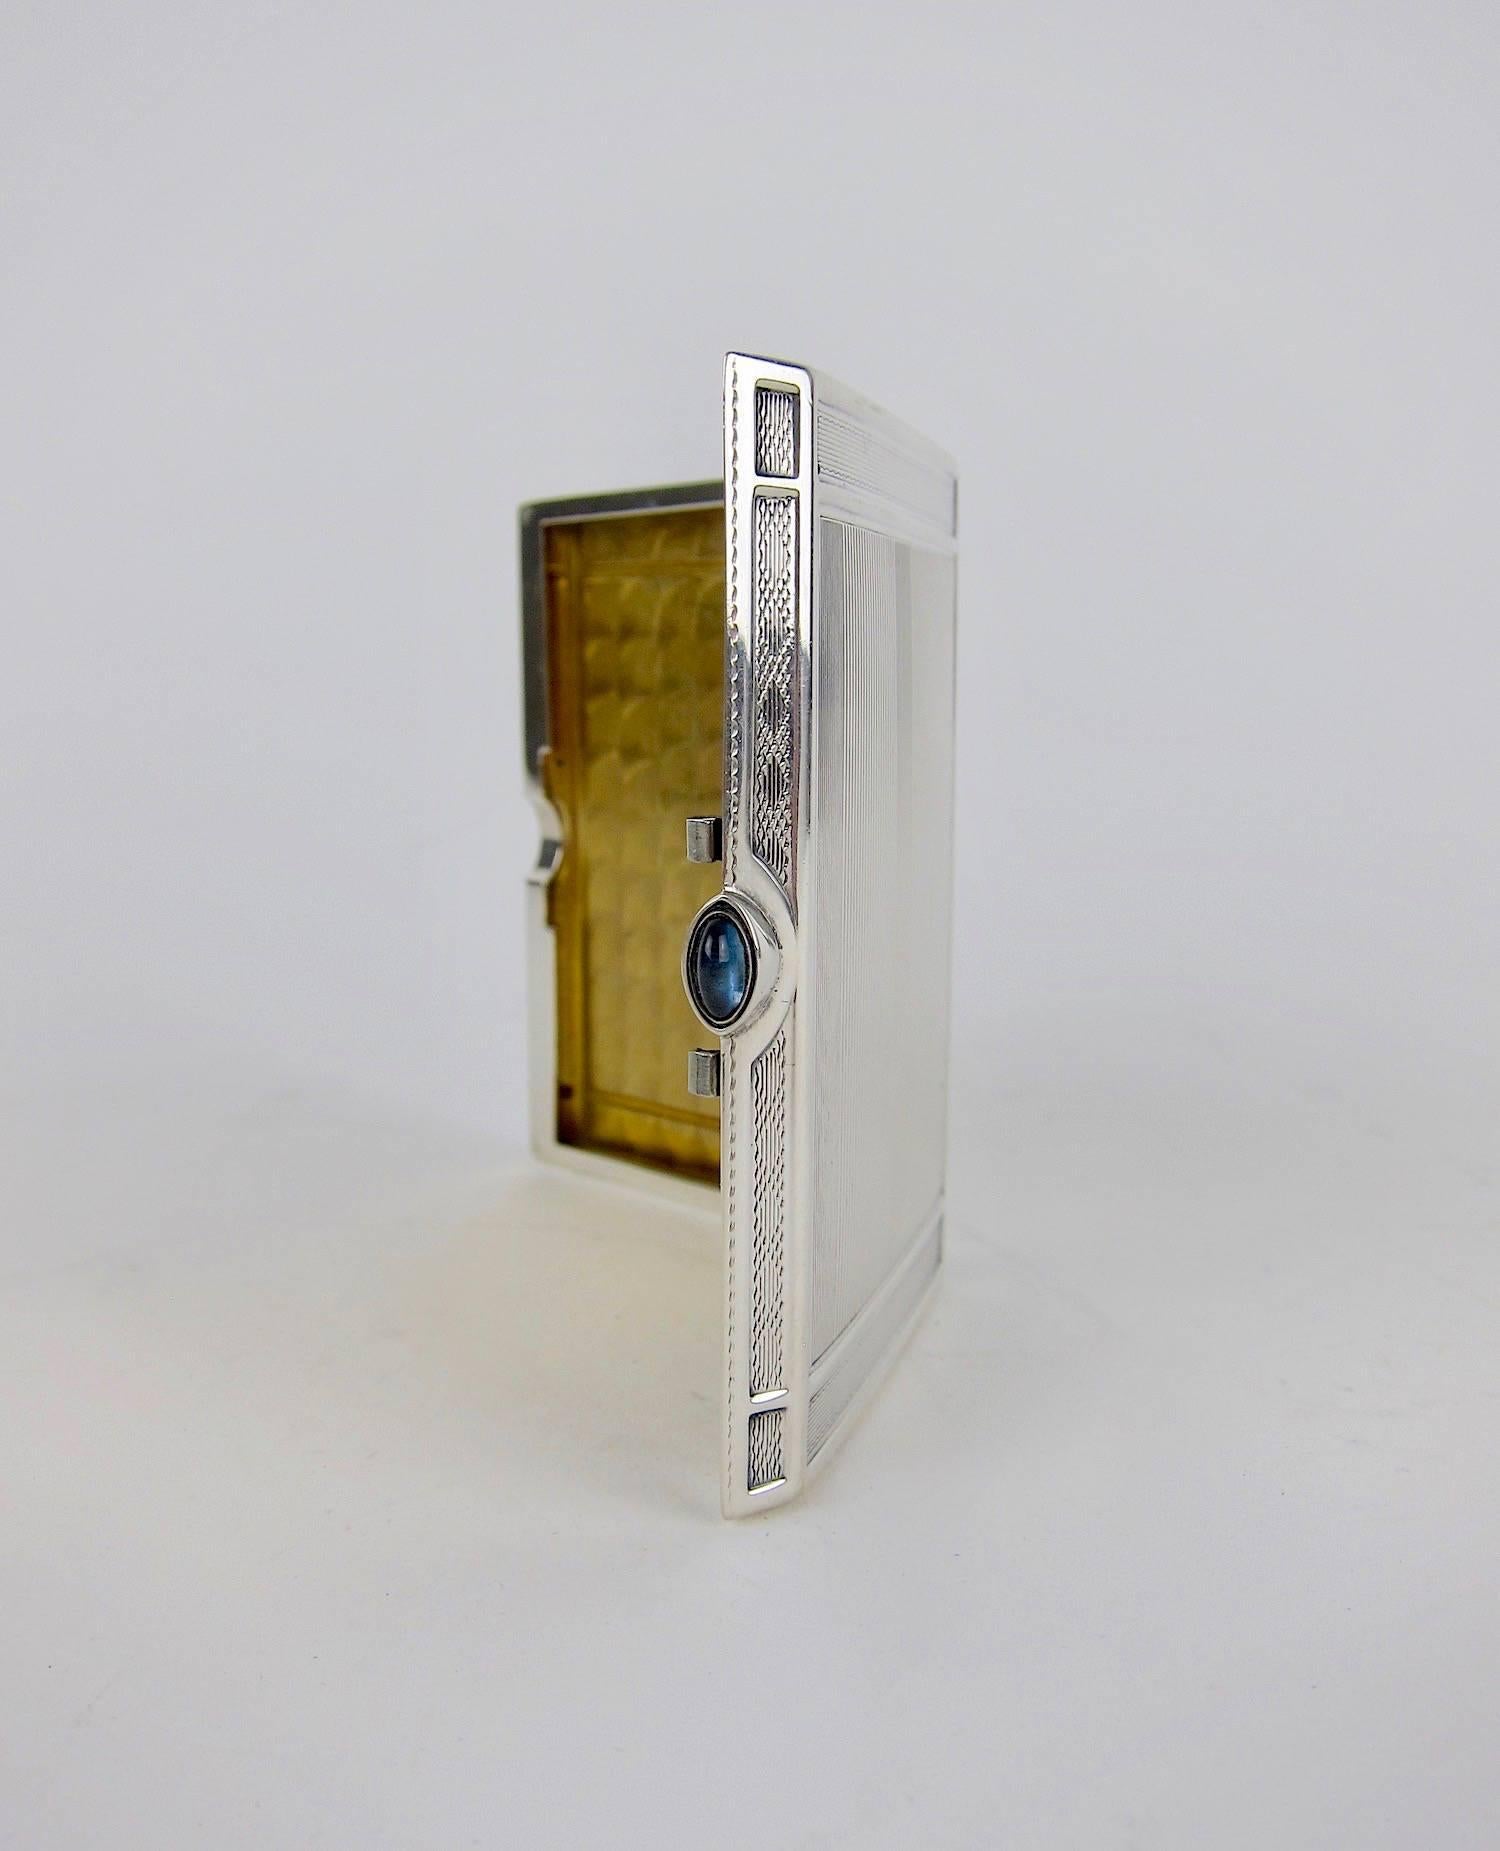 A vintage sterling silver cigarette case with a jeweled cabochon clasp and gilt interior, dating to the late 1940s. The Art Deco silver case was manufactured by Elgin Silversmith Company of New York with elegant, engine-turned decoration; the blue